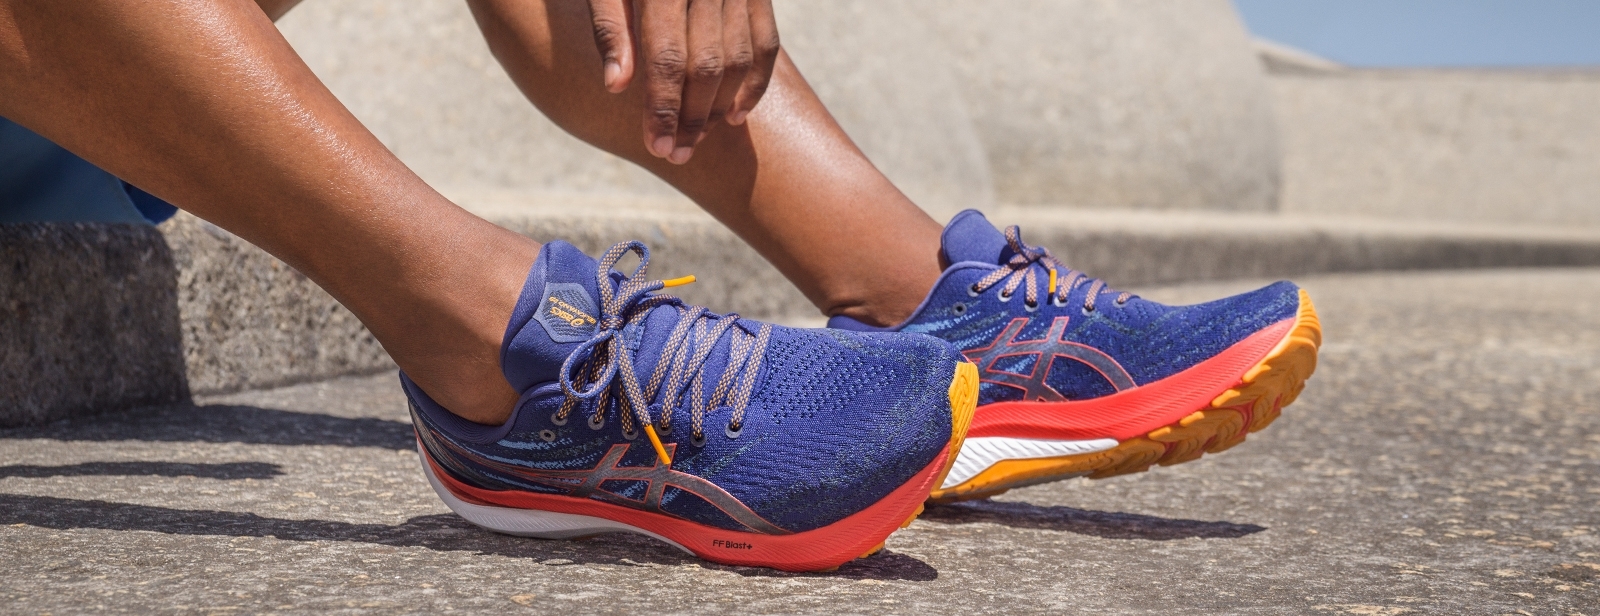 Choosing the Right Running Shoes for Wide Feet